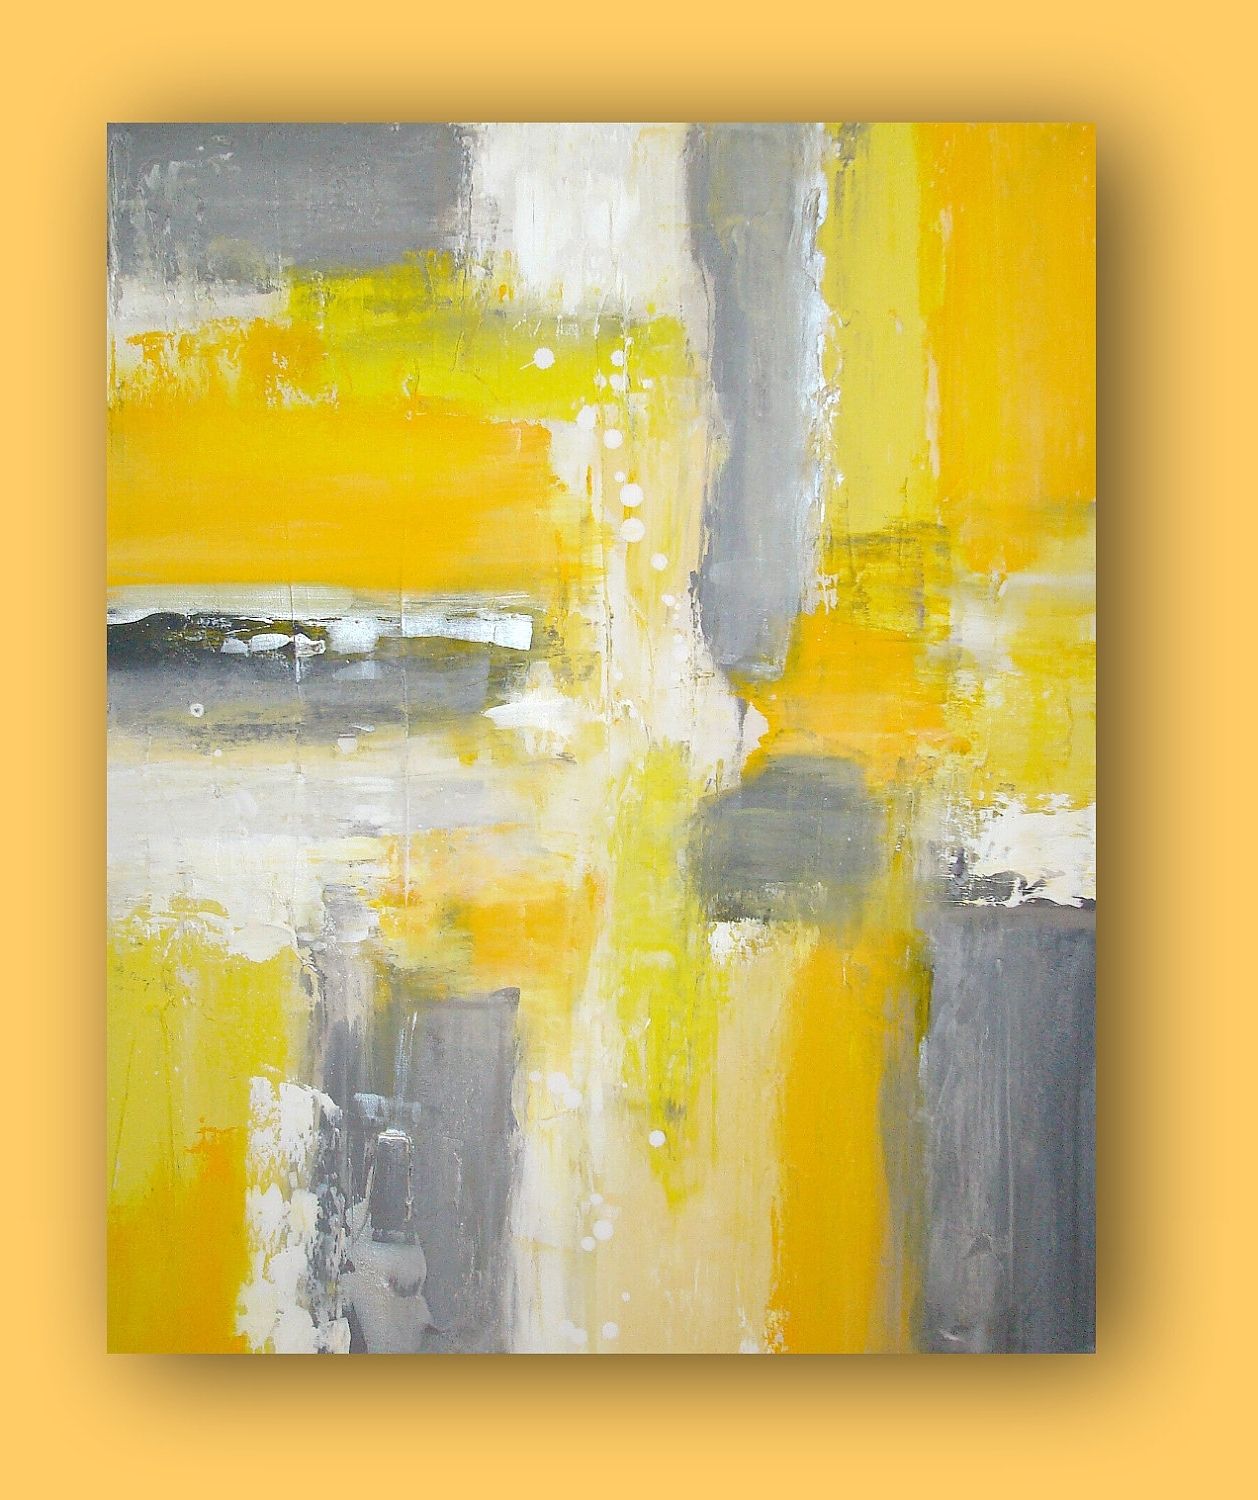 2017 Yellow And Grey Abstract Wall Art Throughout Art Original Yellow And Gray Acrylic Painting On Gallery Canvas (View 8 of 15)